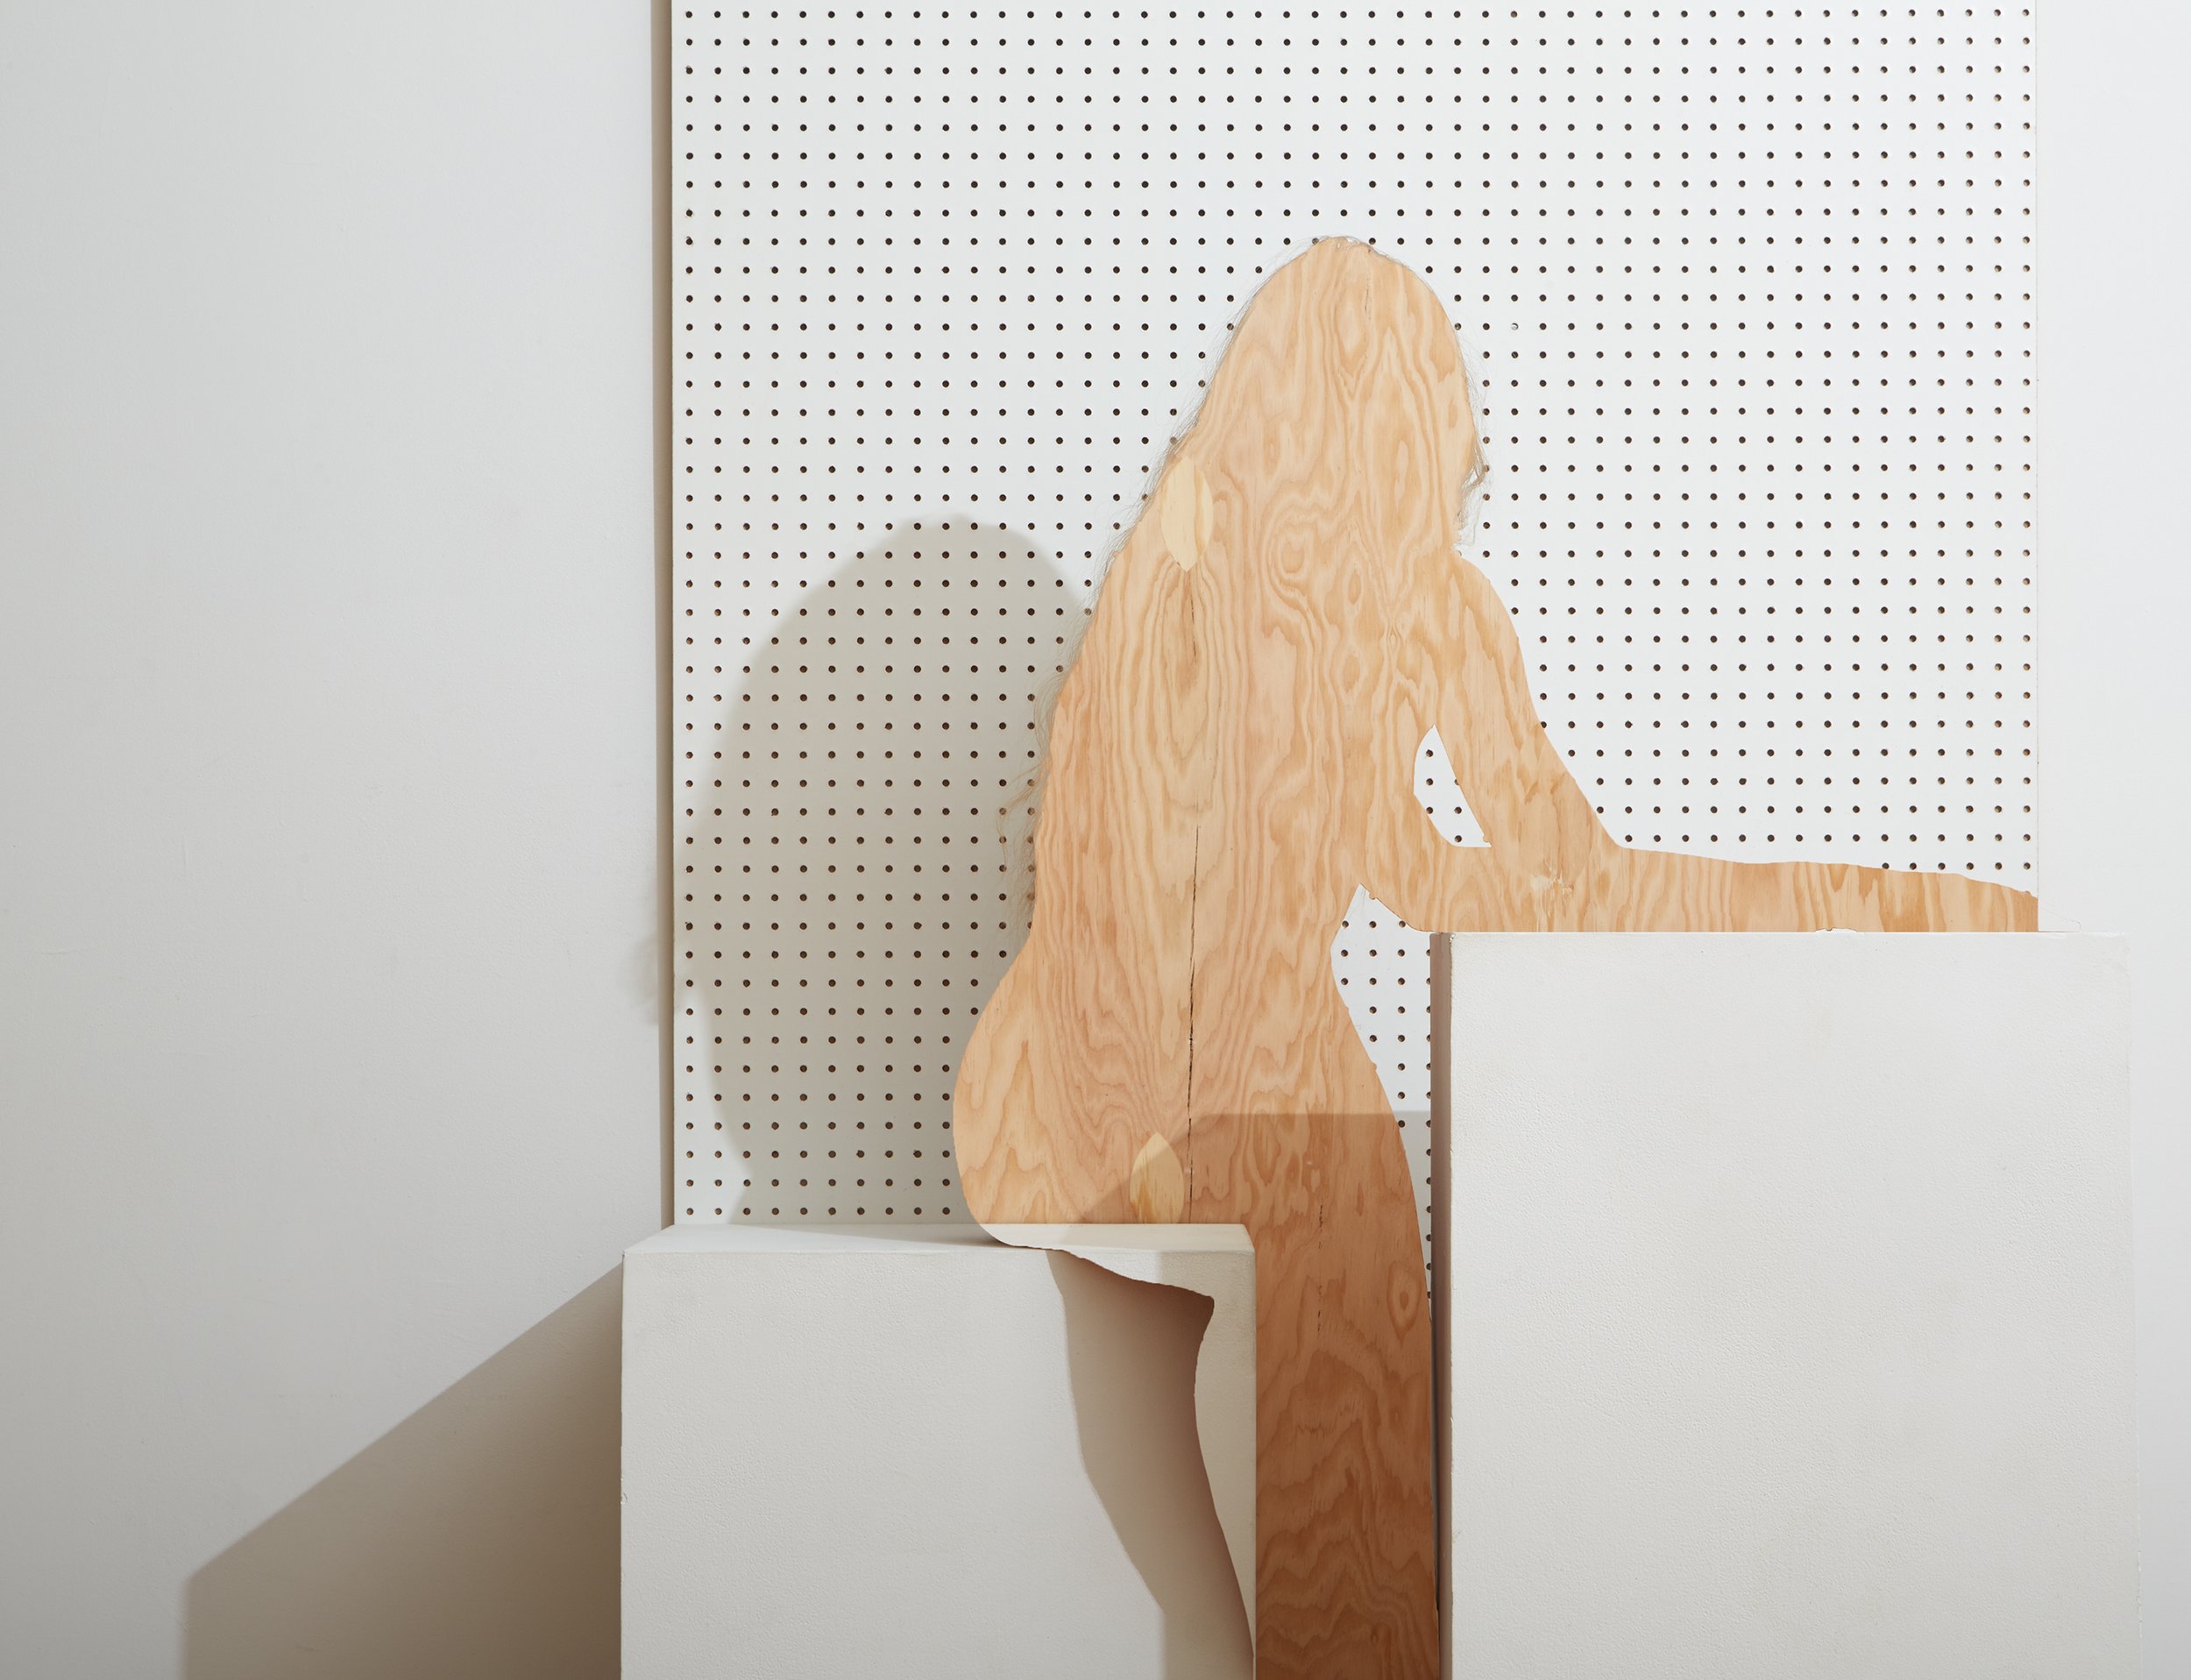 07_Hailey-with-Pegboard-and-Plywood.jpg